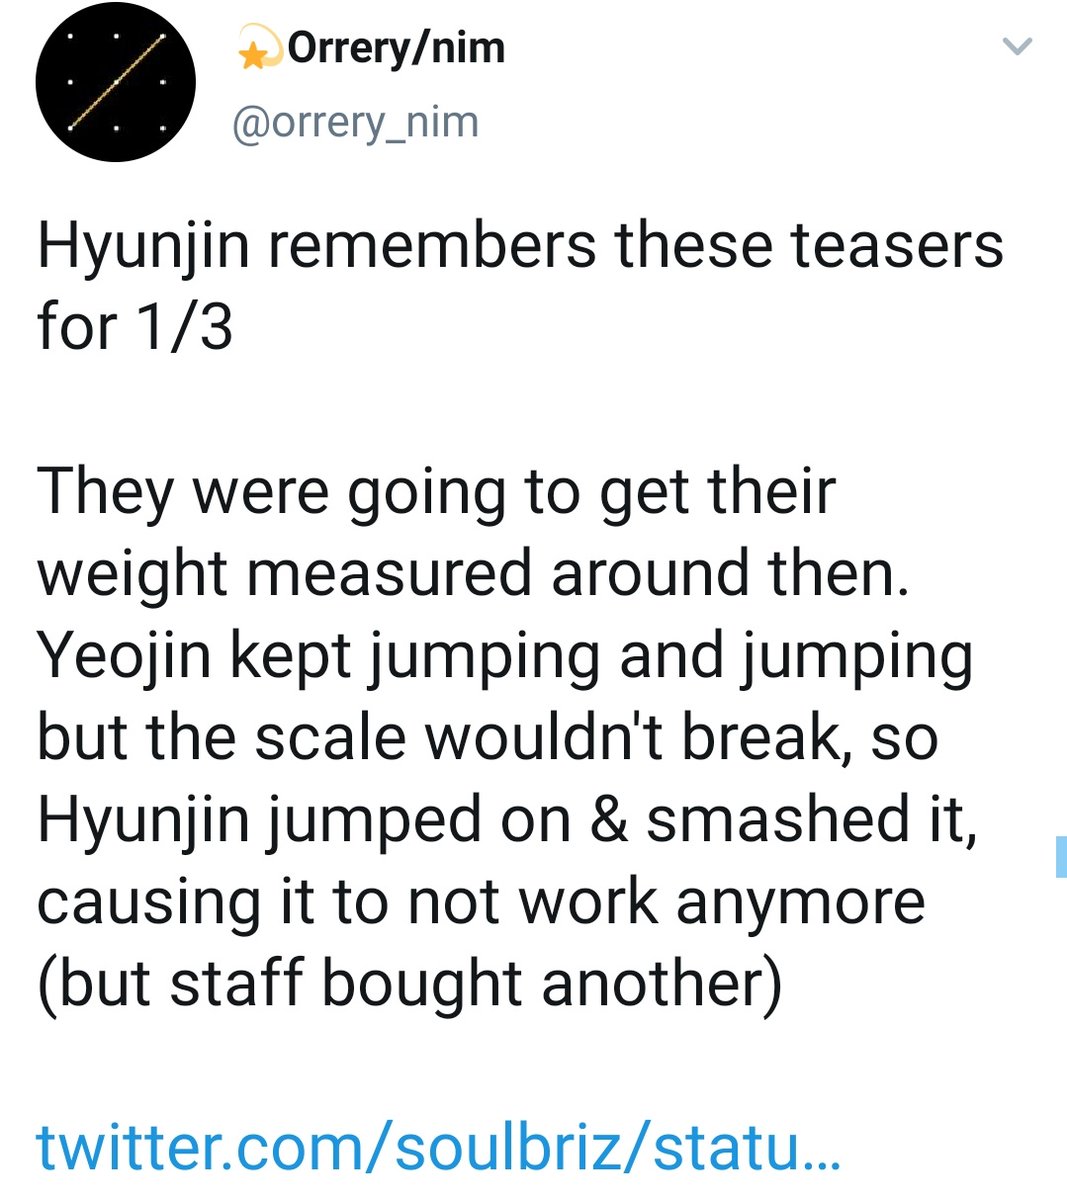 One time, Hyunjin & Yeojin covered up the CCTV cameras so they could break a scale because they didn't want to be weighed anymore. So they took turns jumping on it until Hyunjin finally broke it. Then BBC trifling self bought another one. 